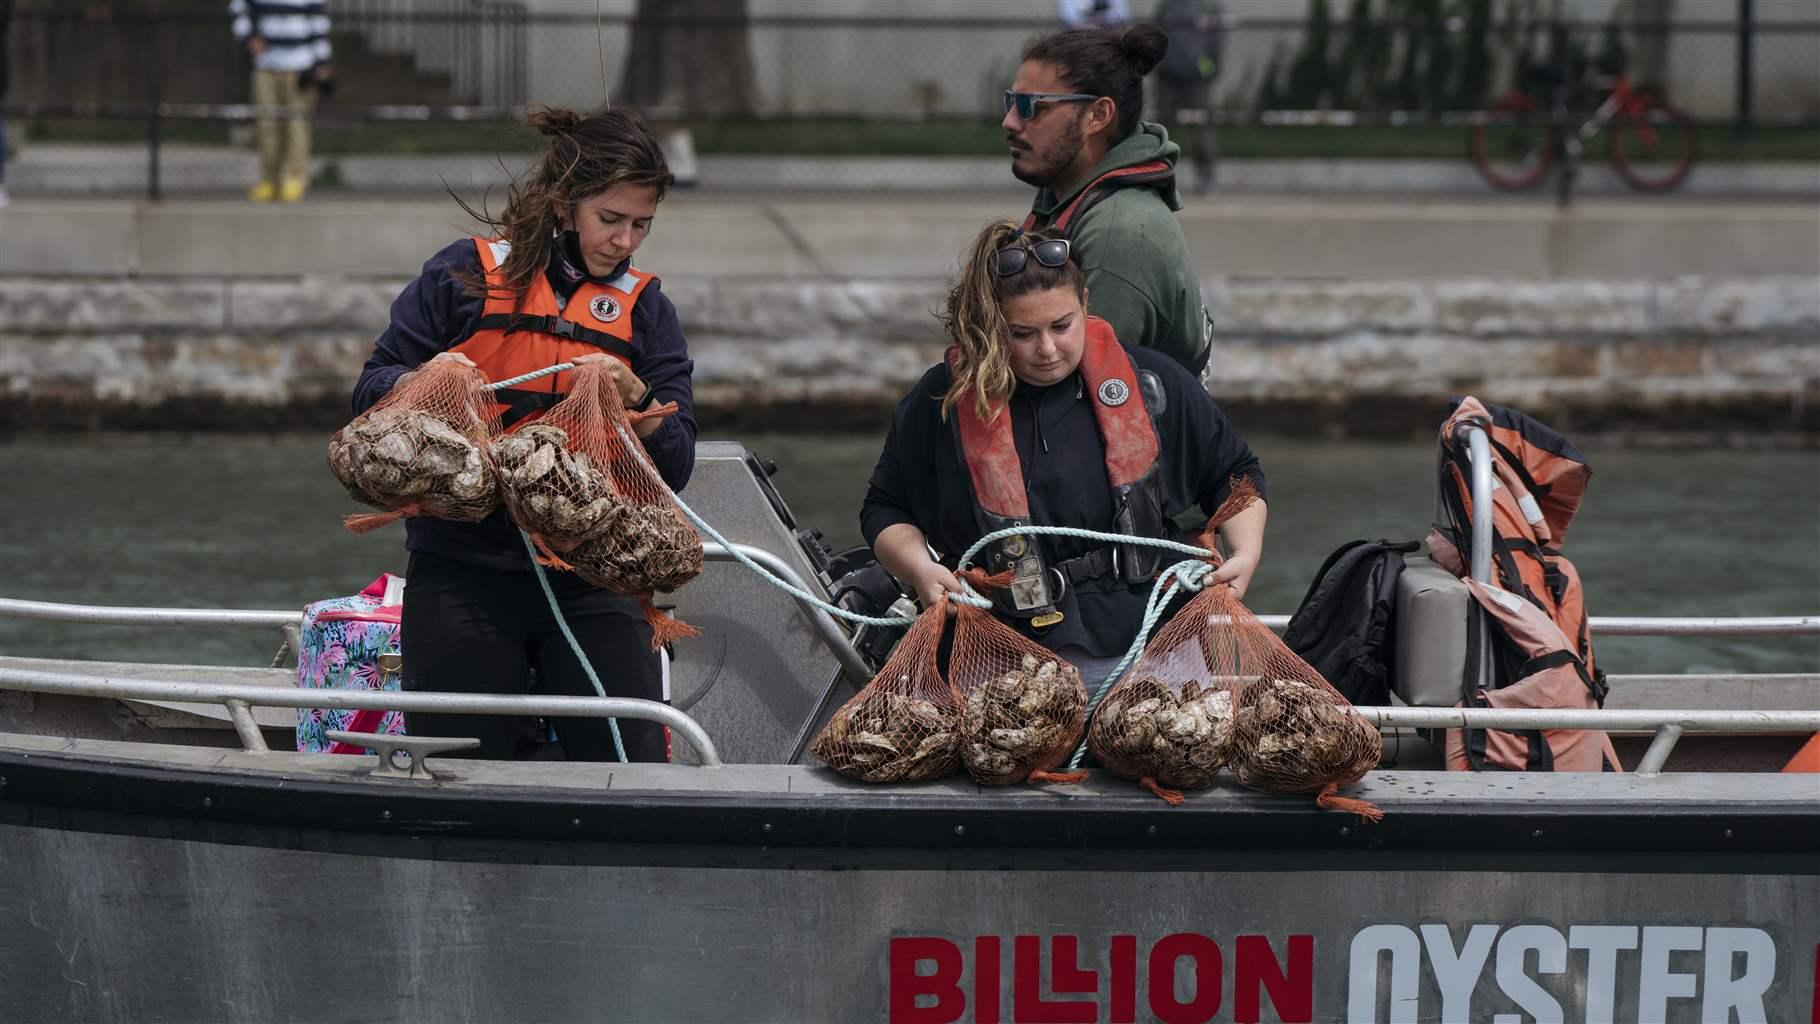 Danielle Bissett, the director of restoration for the Billion Oyster Project and Rebecca Resner, the hatchery manager for Billion Oyster Project, place bags of oysters into Buttermilk Channel off of Governor's Island on May 28, 2021.